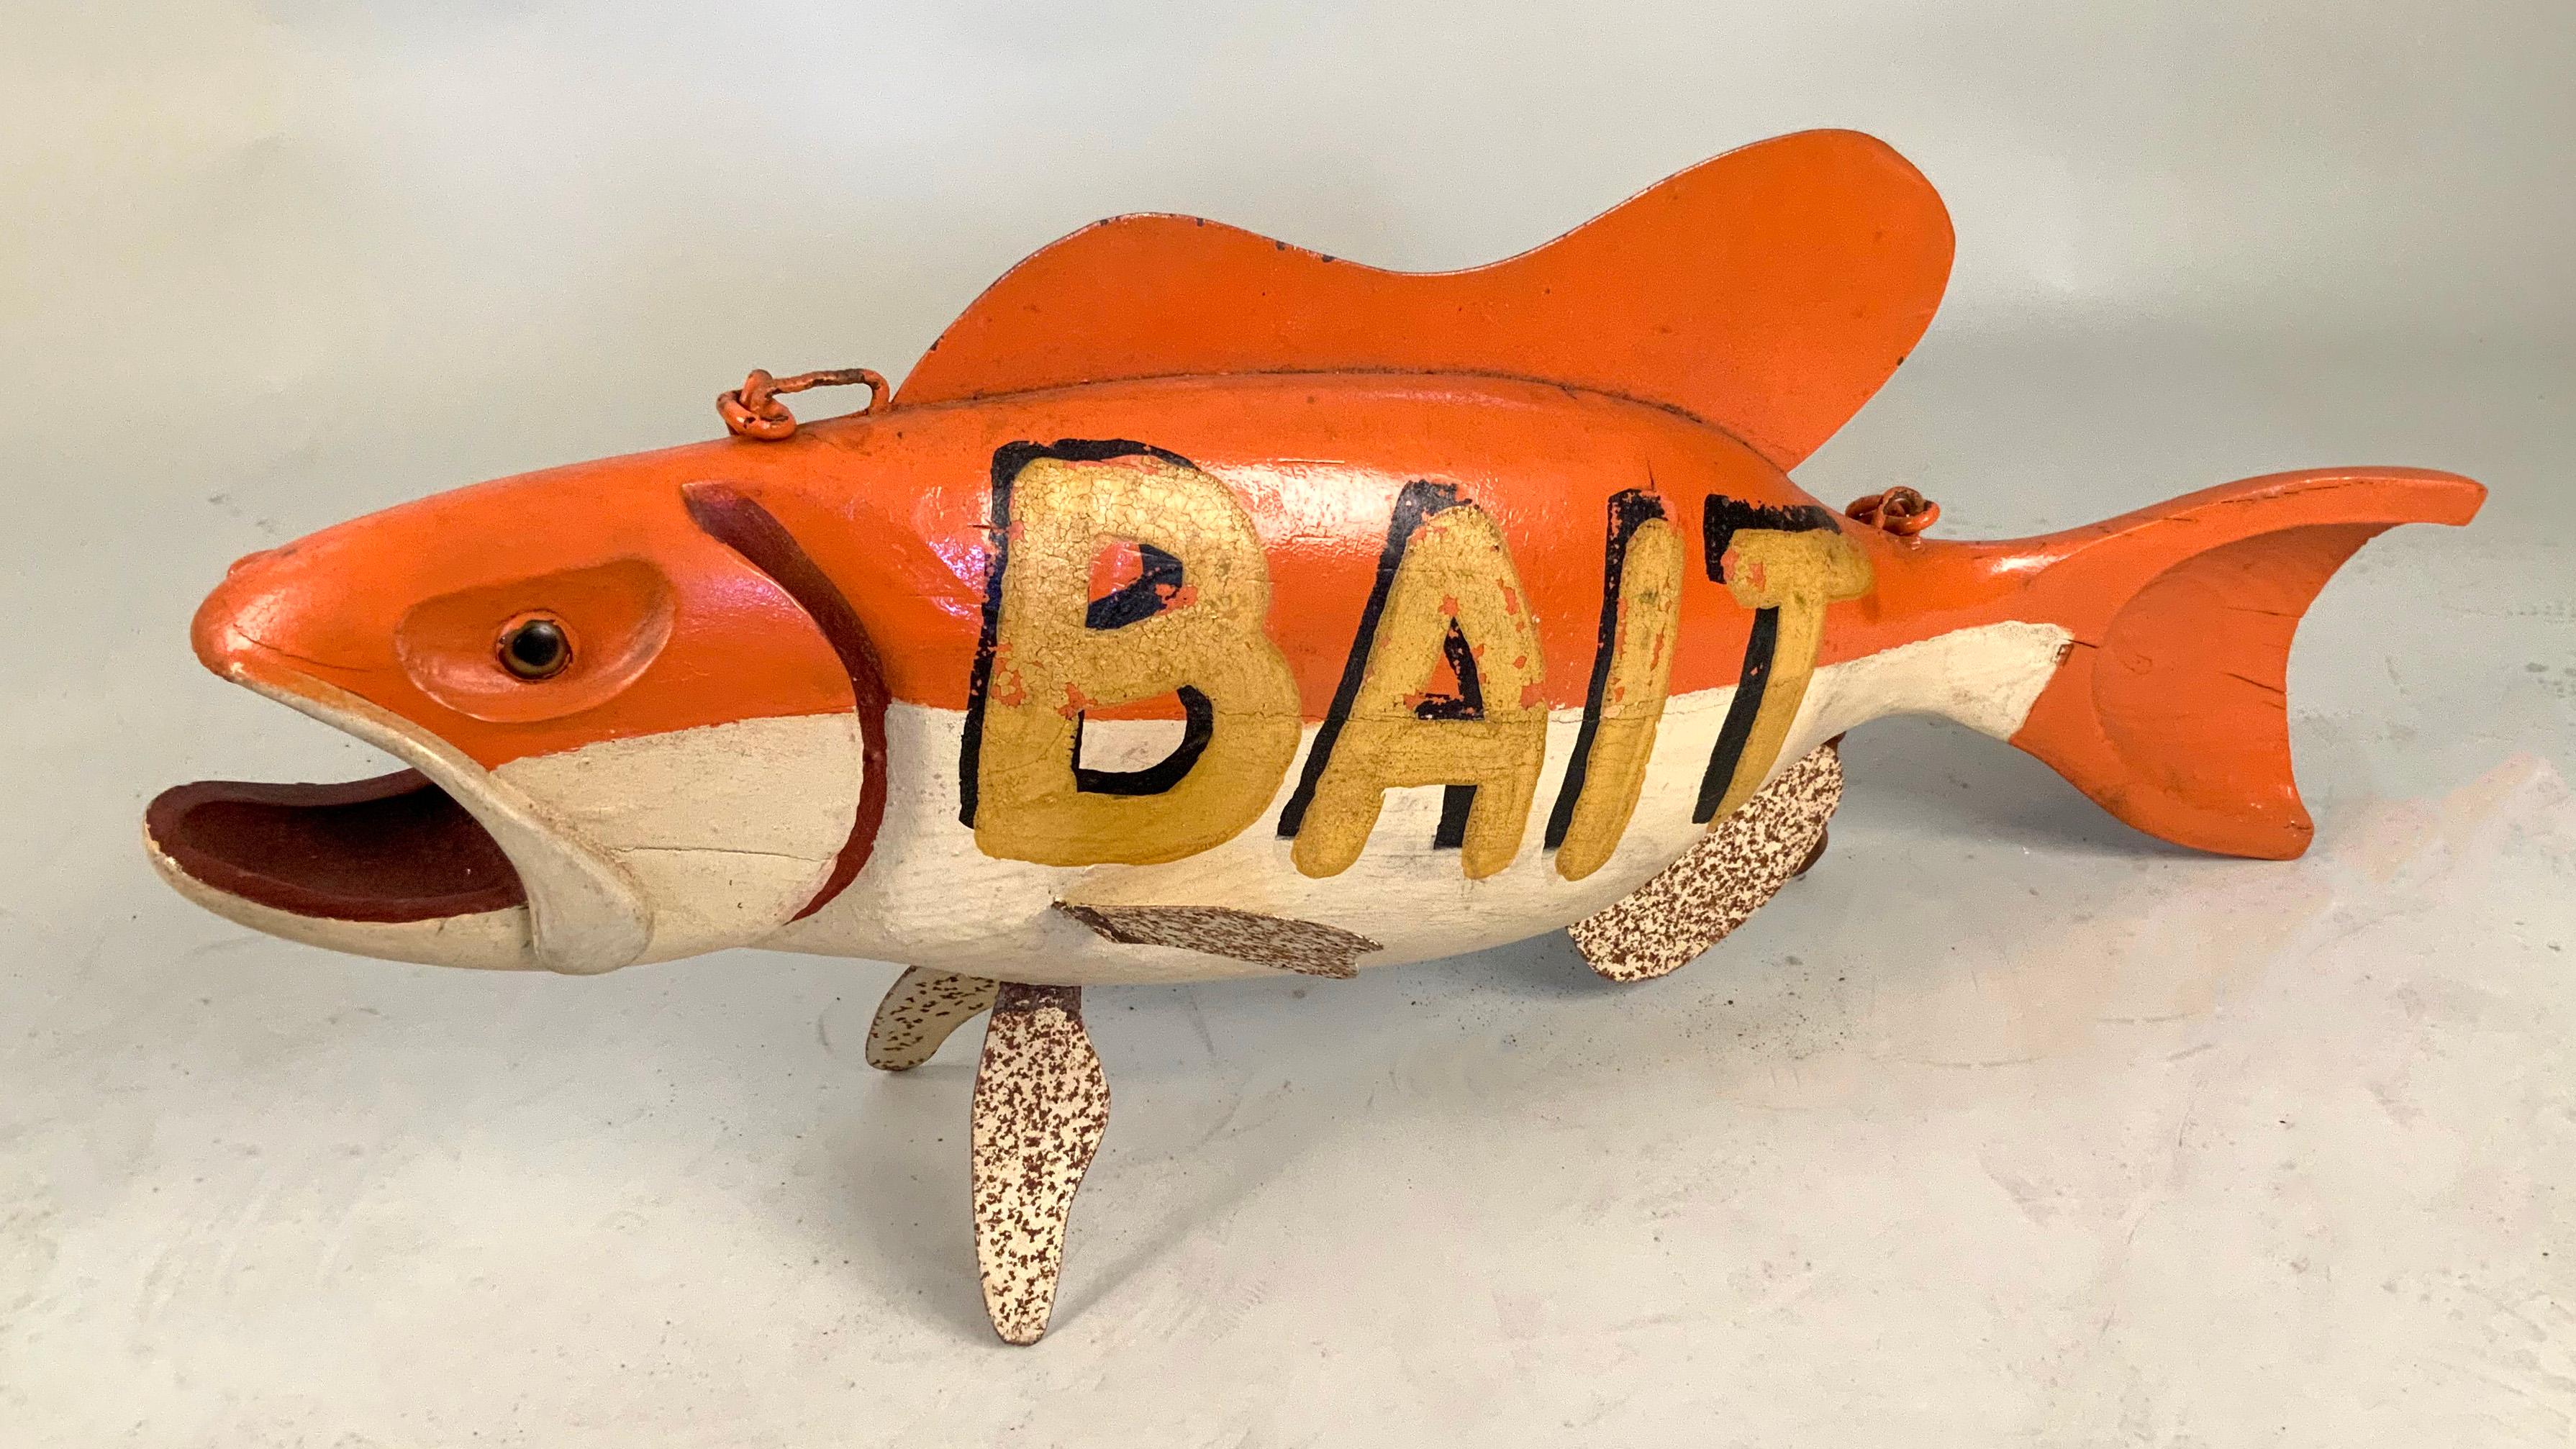 A very charming vintage trade sign for fish bait, in the form of a whole fish, with BAIT hand painted on one side, and an iron chair instact for hanging it -- painted in its original colors of orange white and with steel fins painted as well. Good